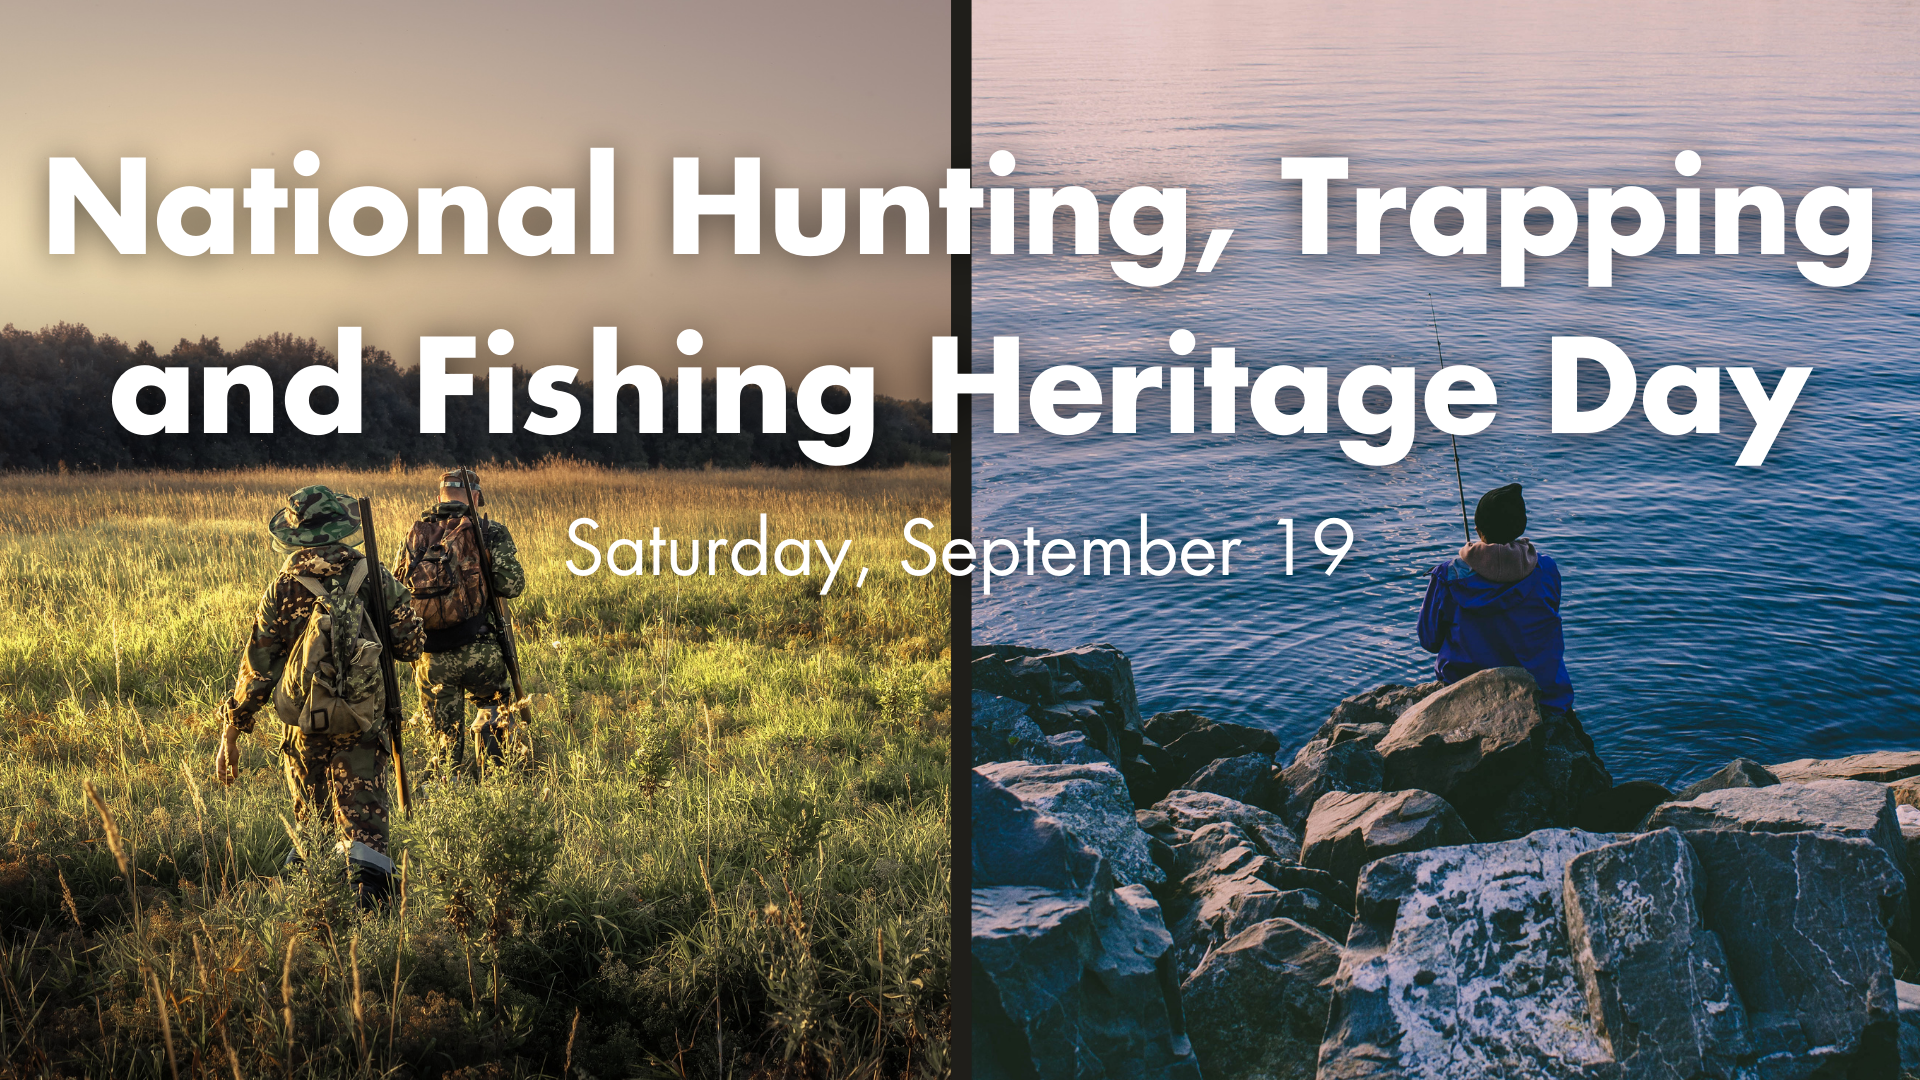 2020 National Hunting, Trapping and Fishing Heritage Day